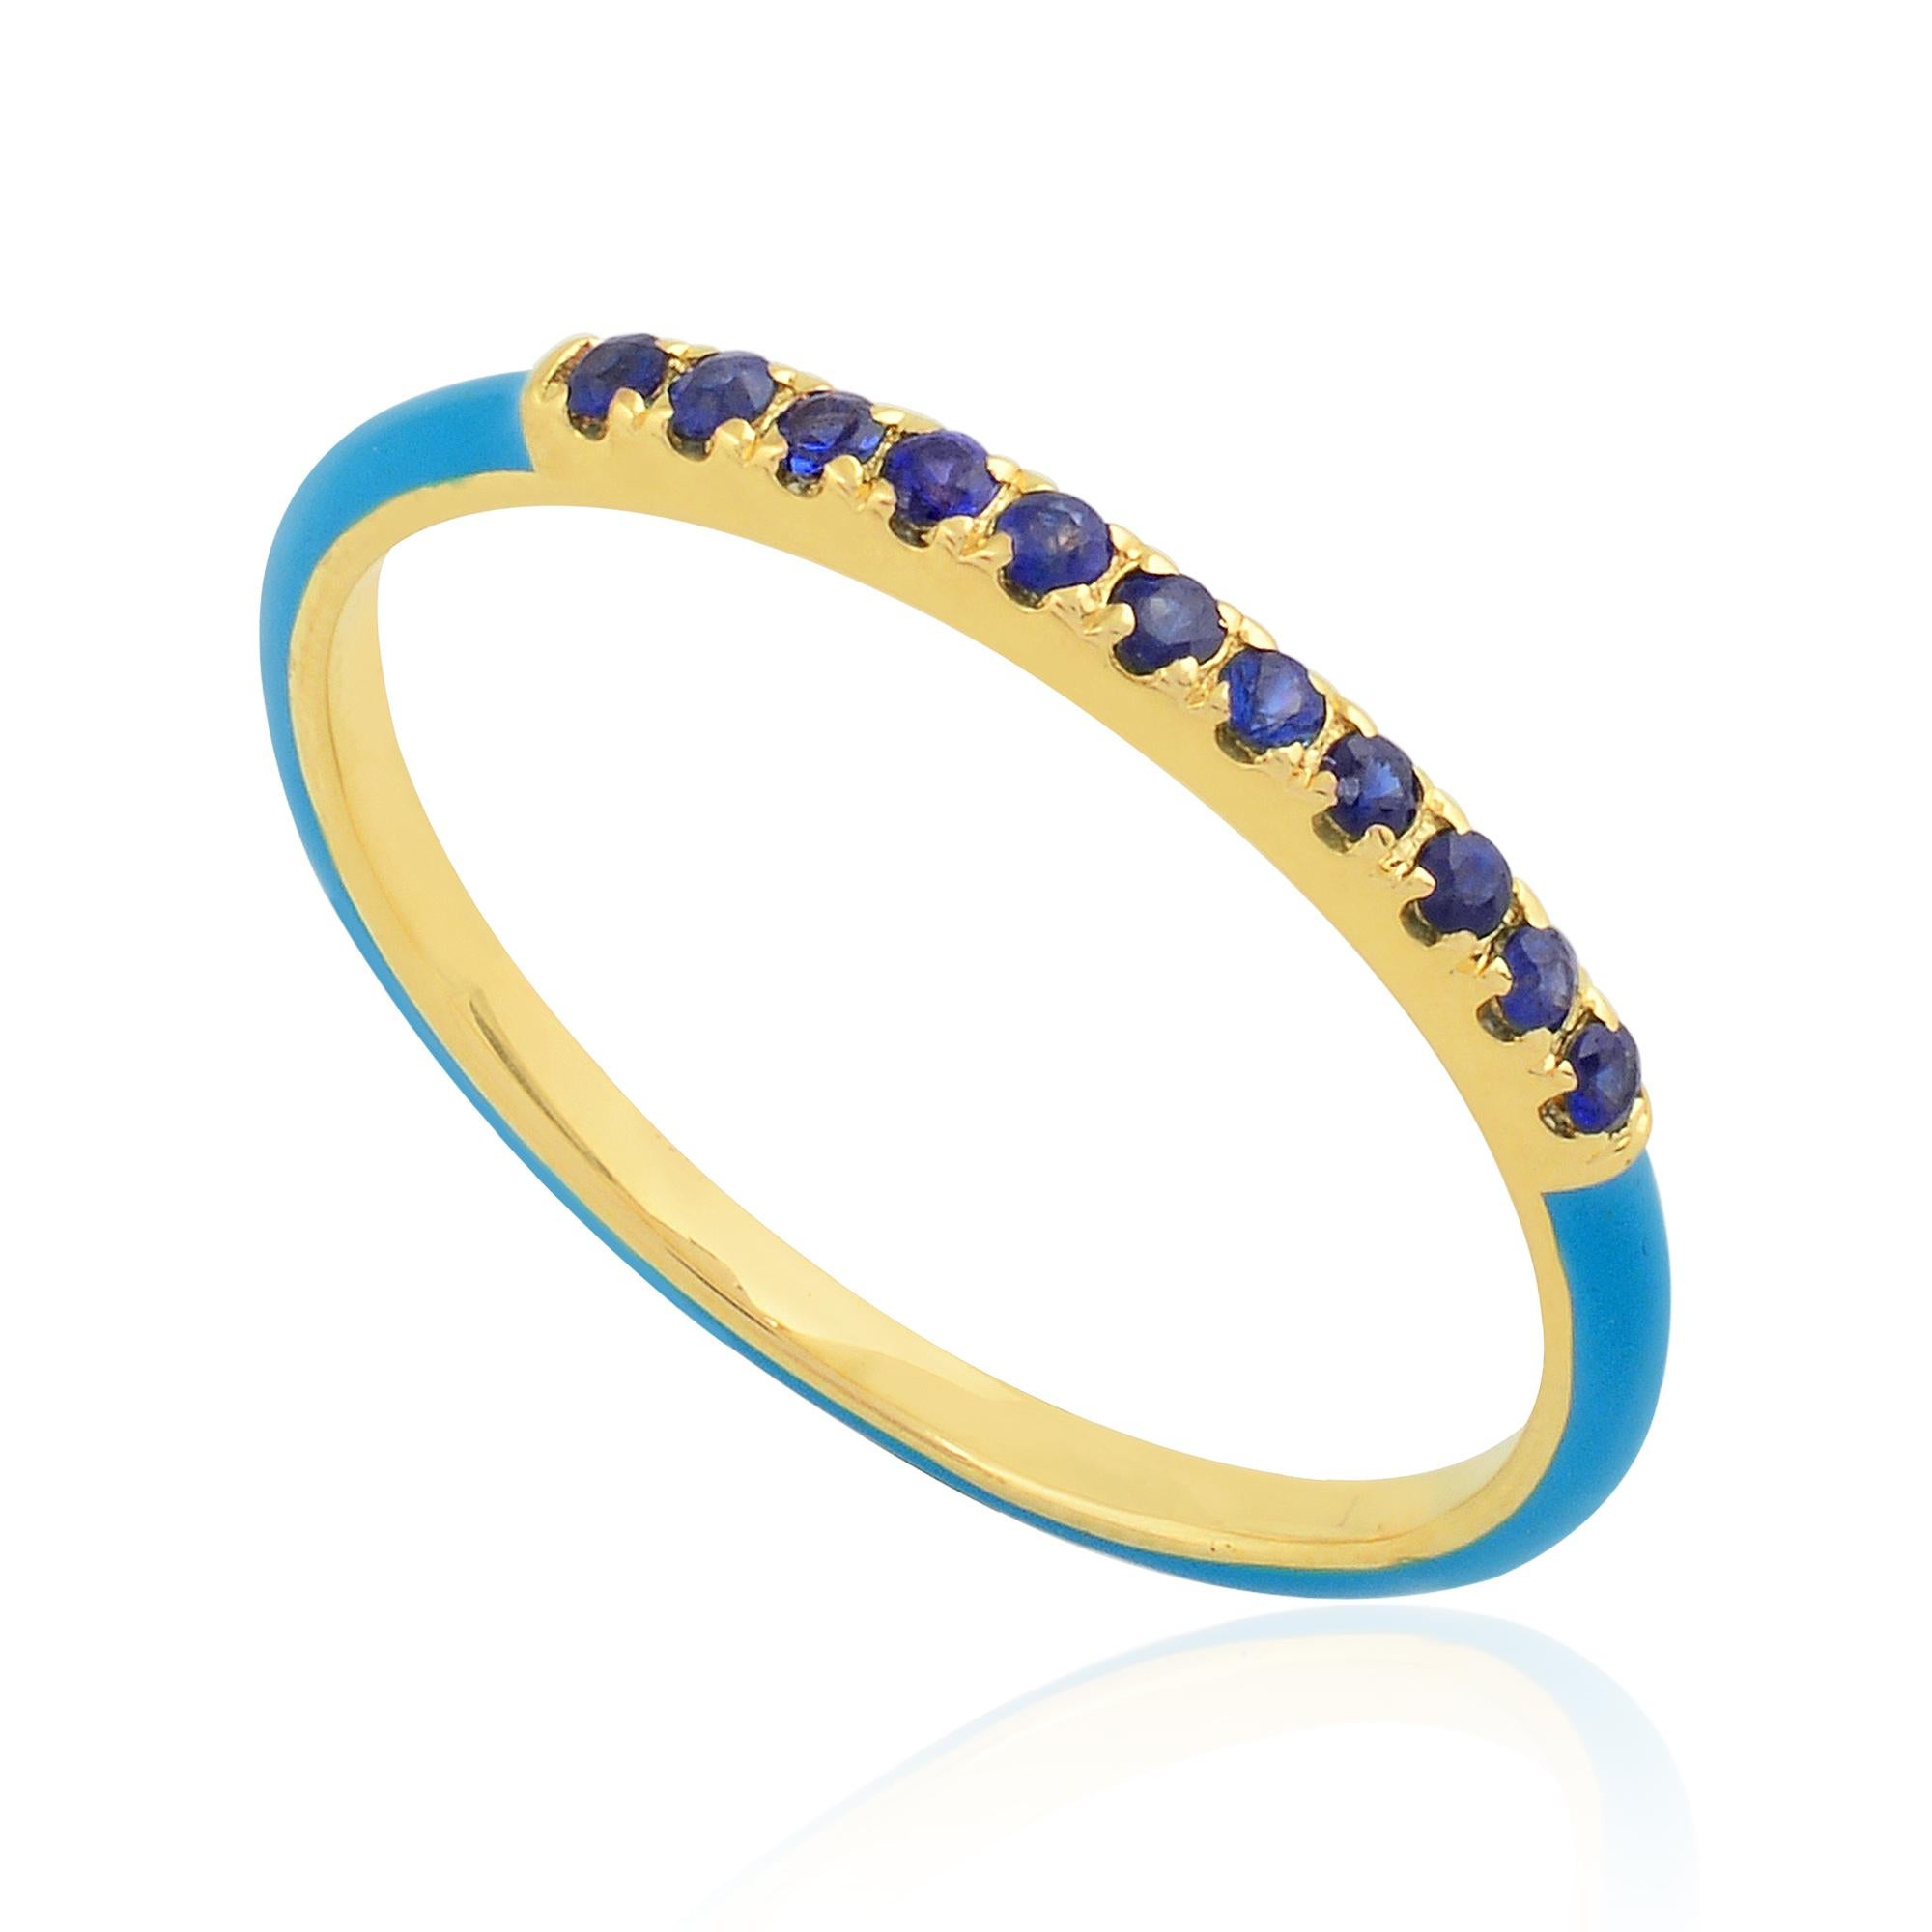 Item Code :- SFR-2032D
Gross Wt. :- 1.14 gm
14k Solid Yellow Gold Wt. :- 1.11 gm
Natural Blue Sapphire Wt. :- 0.15 Ct.
Ring Size :- 7 US & All size

✦ Sizing
.....................
We can adjust most items to fit your sizing preferences. Most items